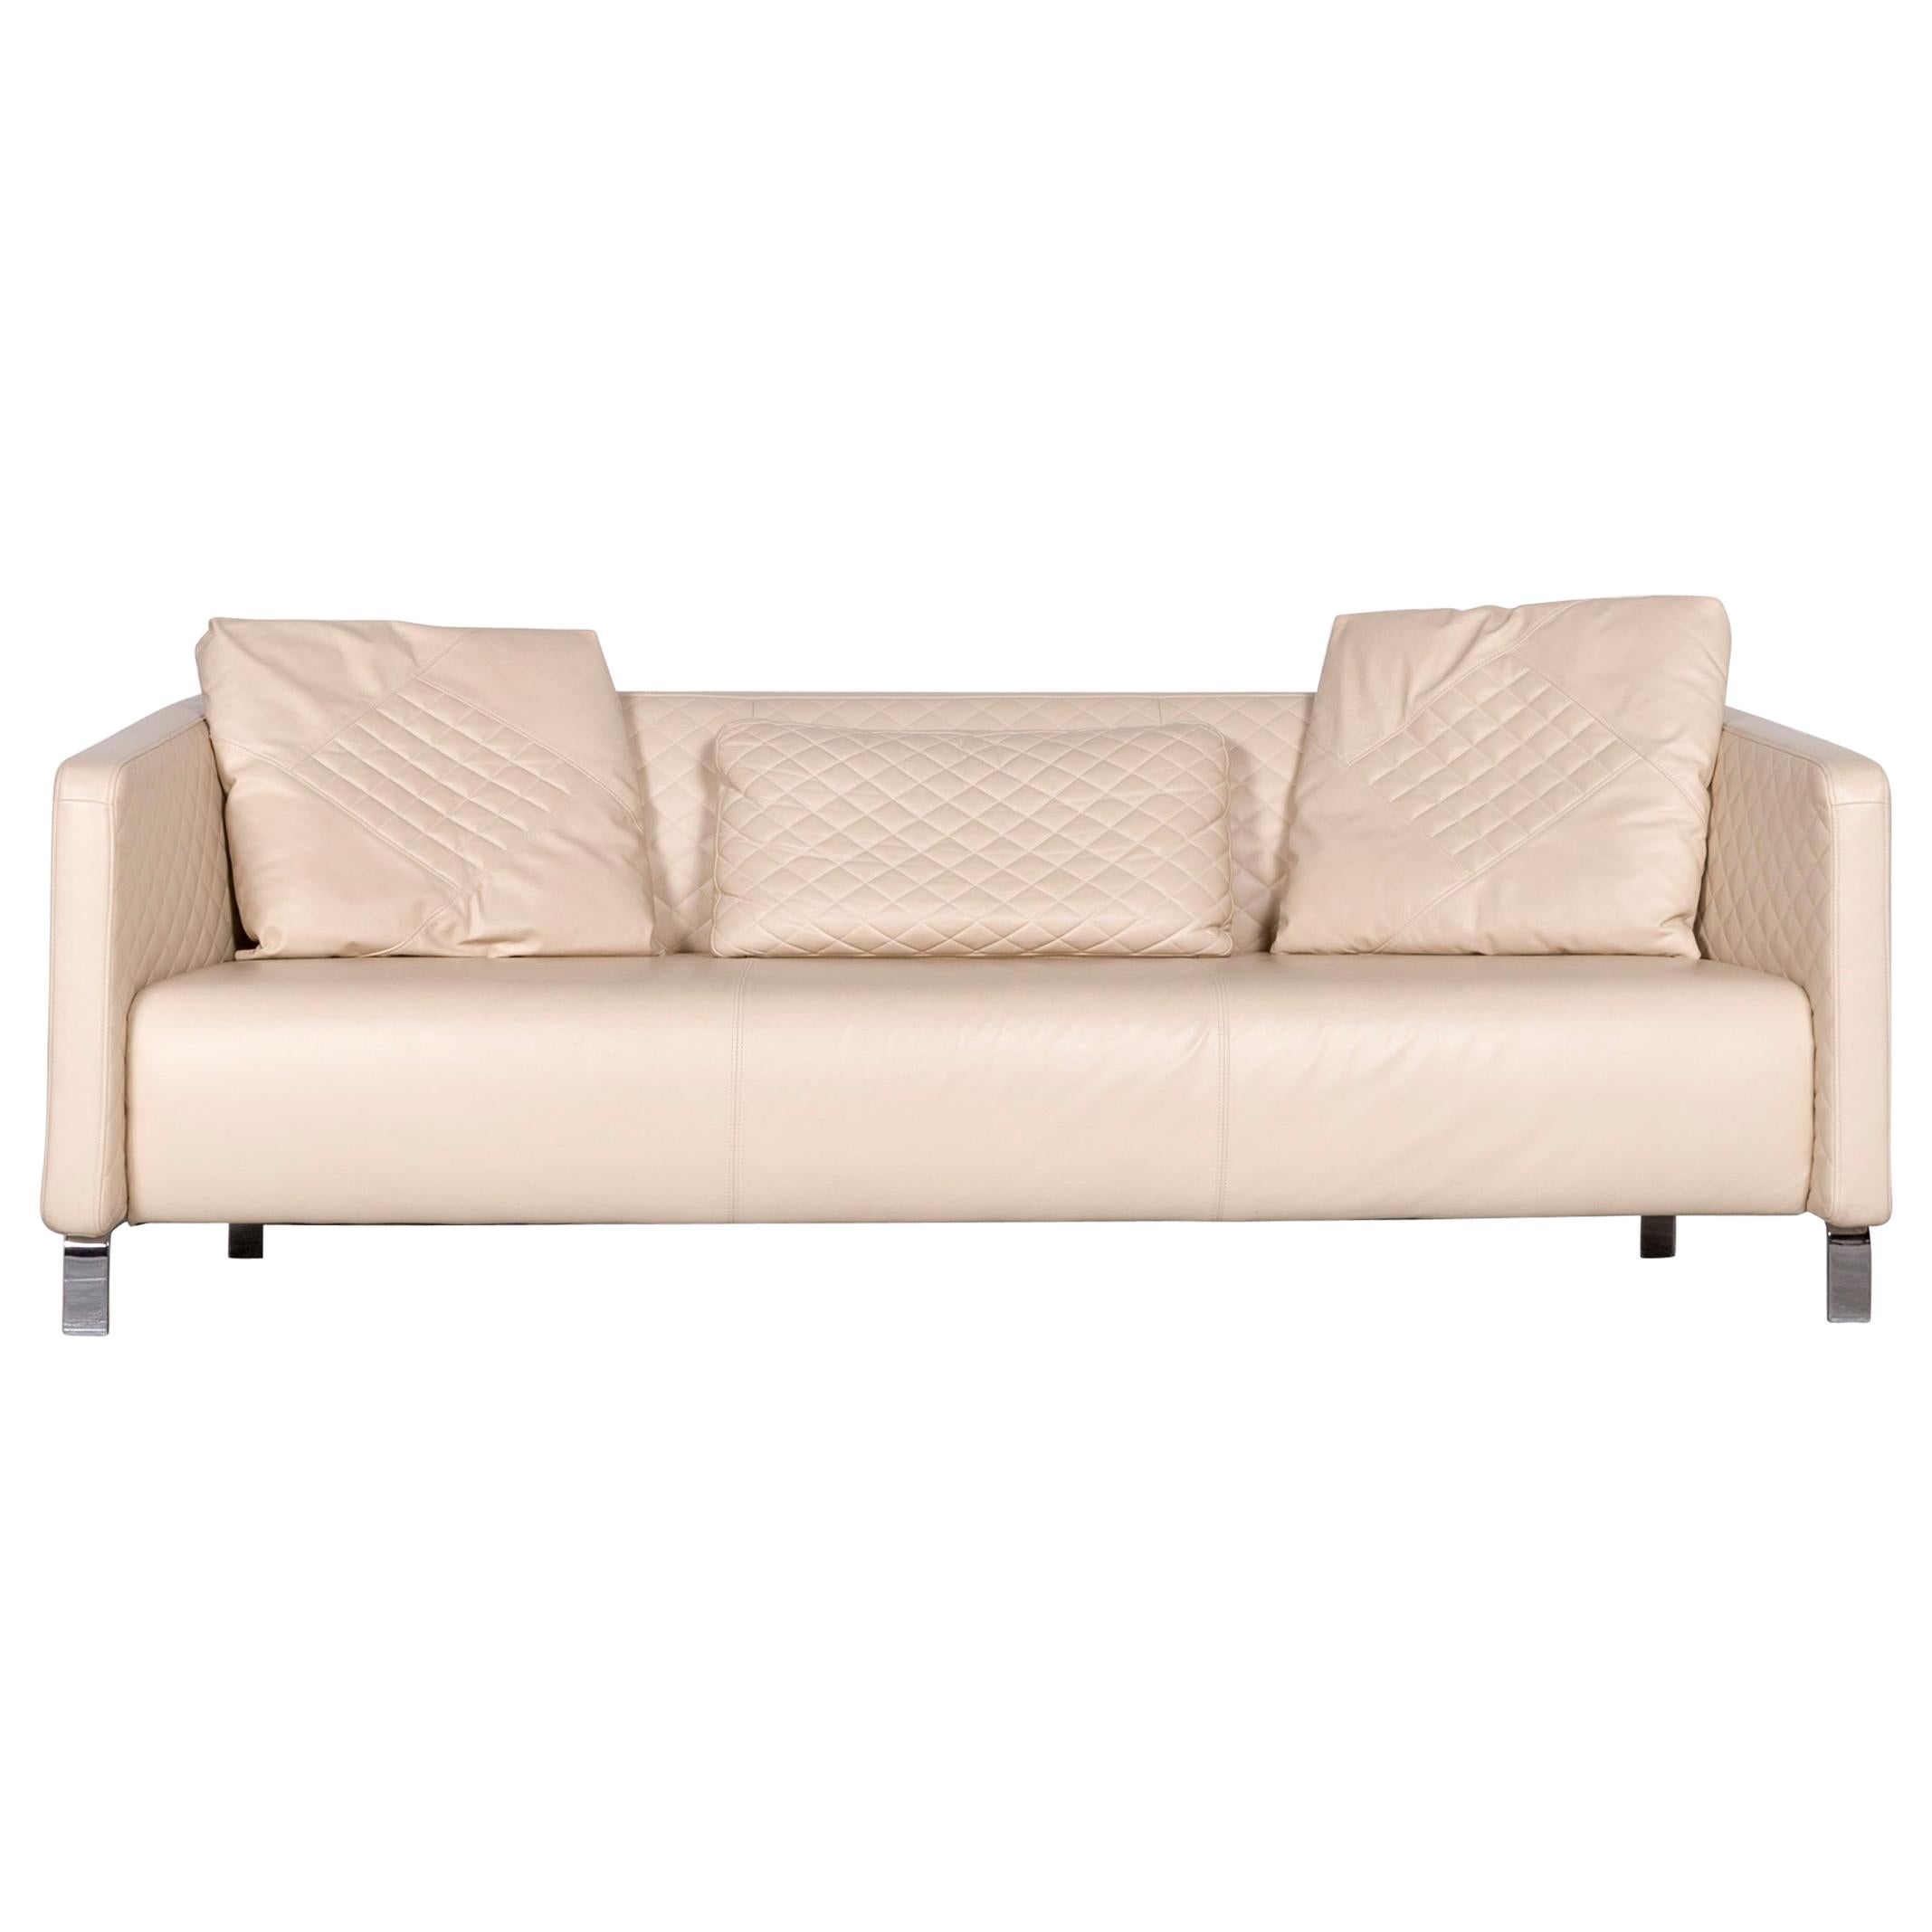 Rolf Benz 325 Designer Leather Sofa Beige Three-Seat Couch For Sale